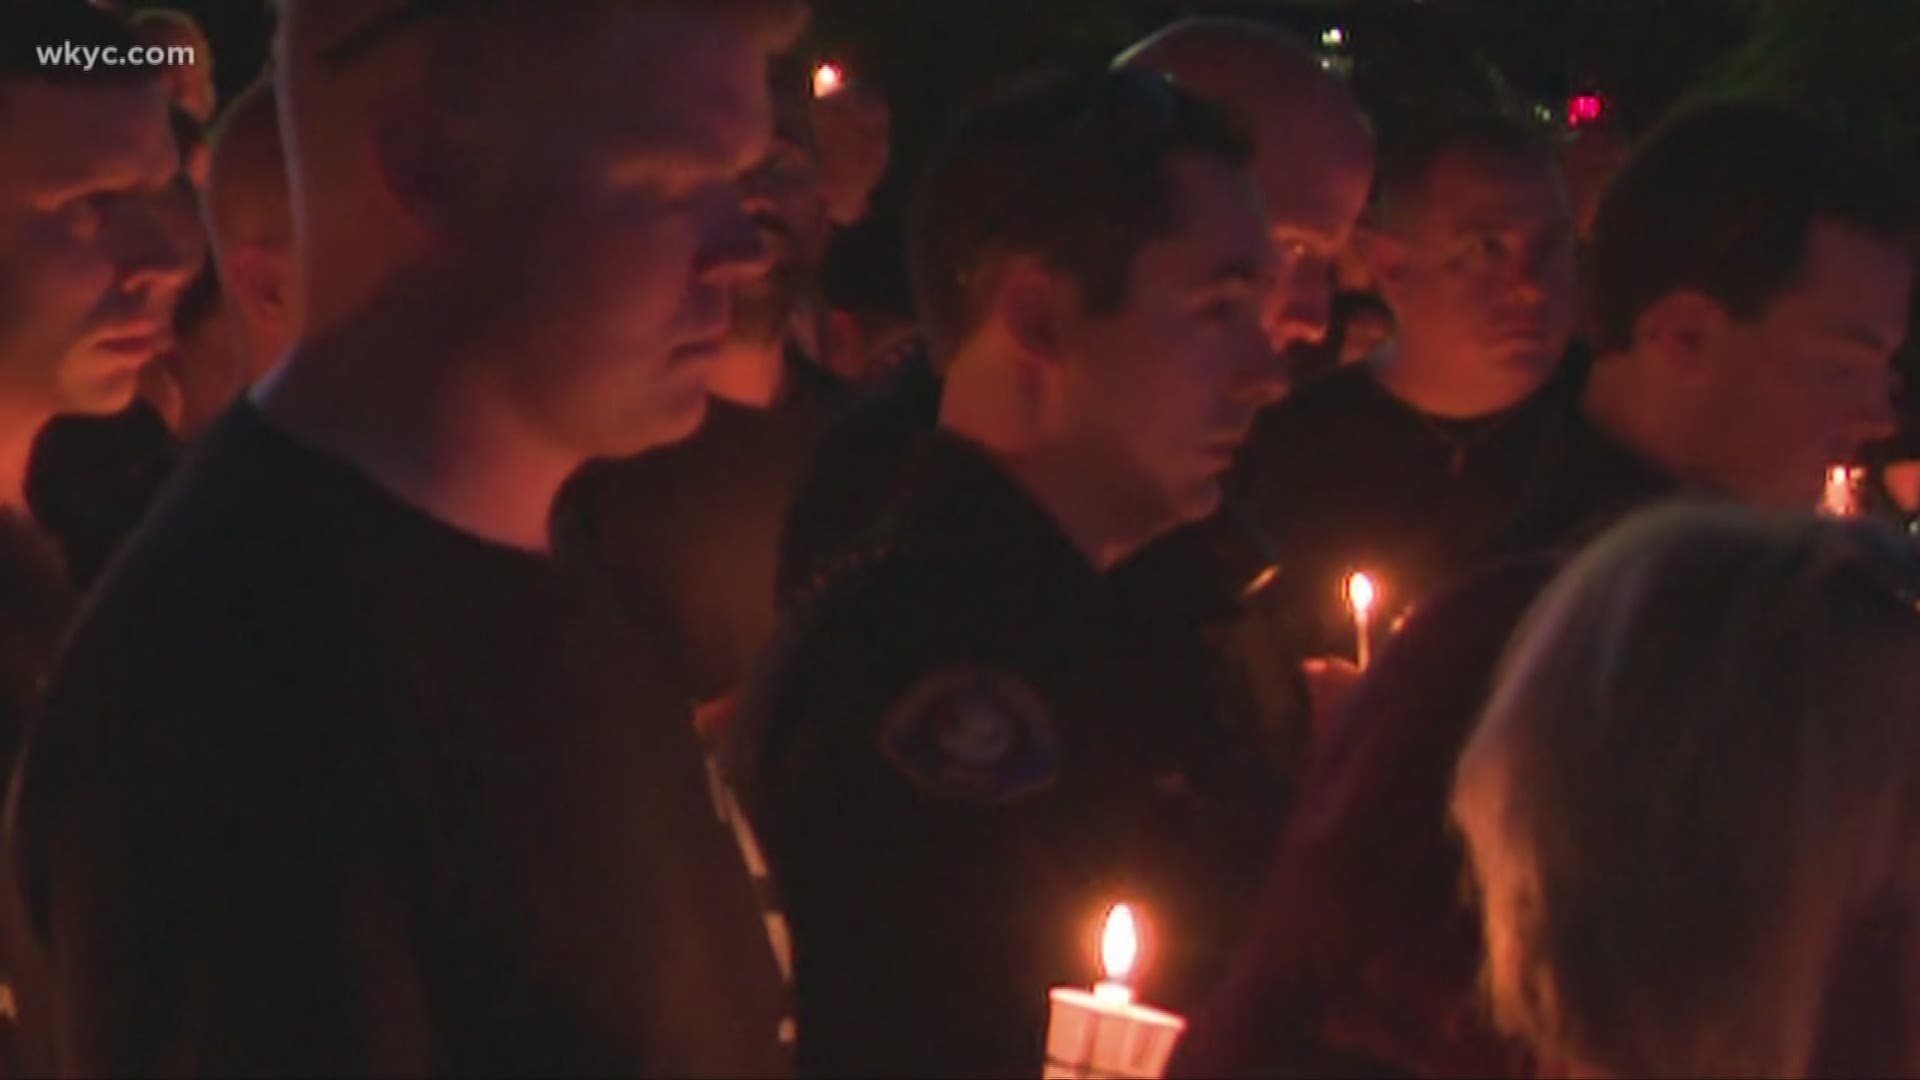 Community honors life and service of fallen Mentor police officer at candlelight vigil